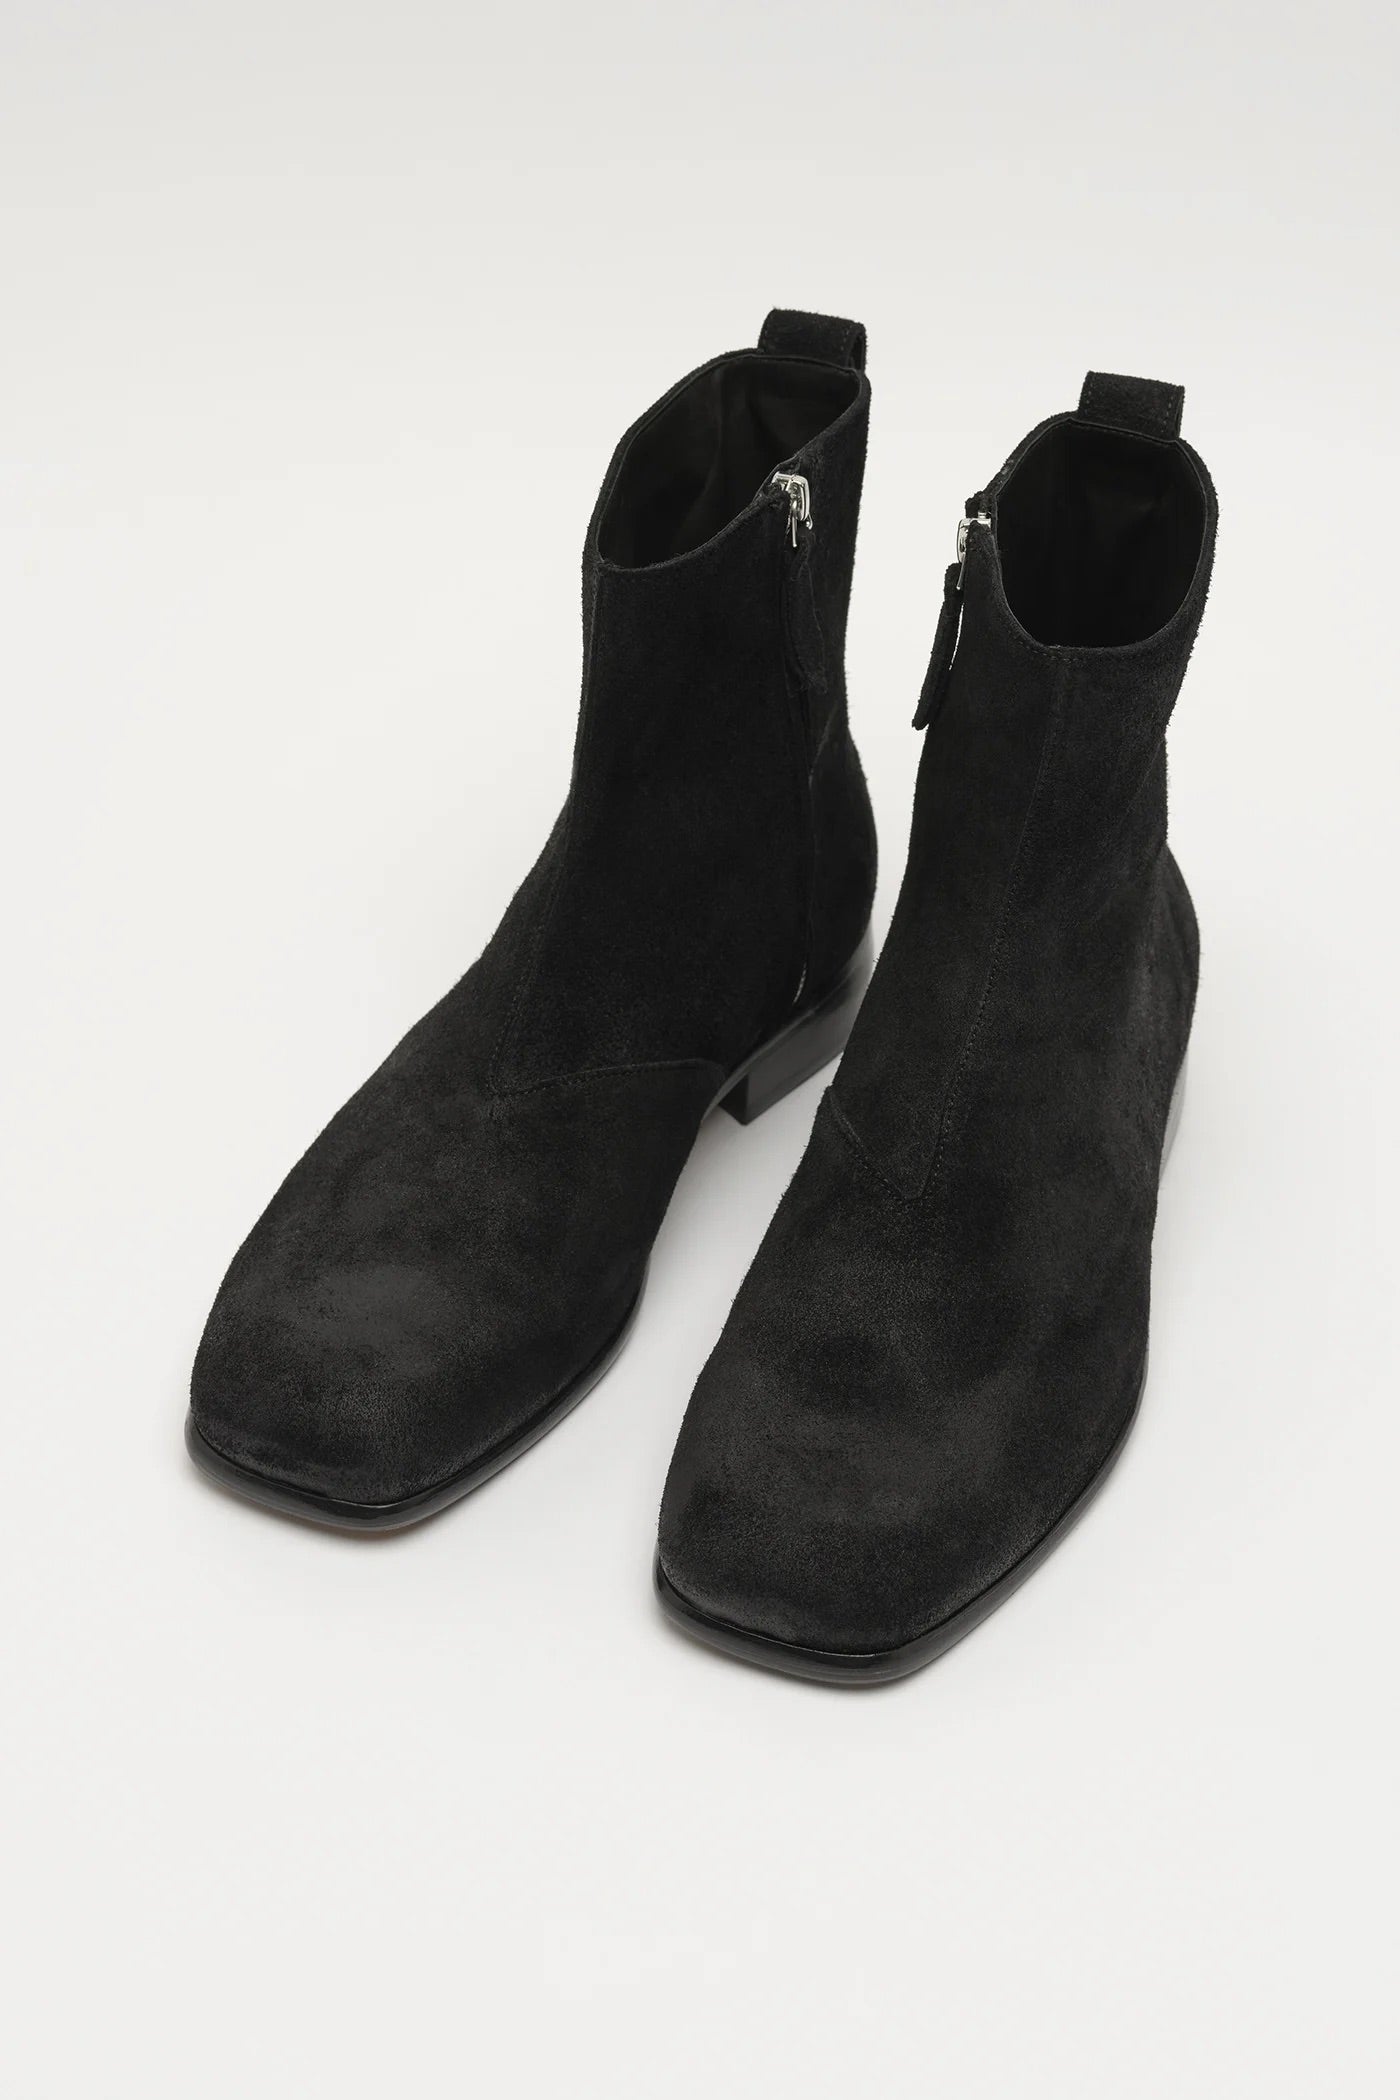 OUR LEGACY 「MICHAELIS BOOT WAXY BLACK SUEDE」 – SISTER